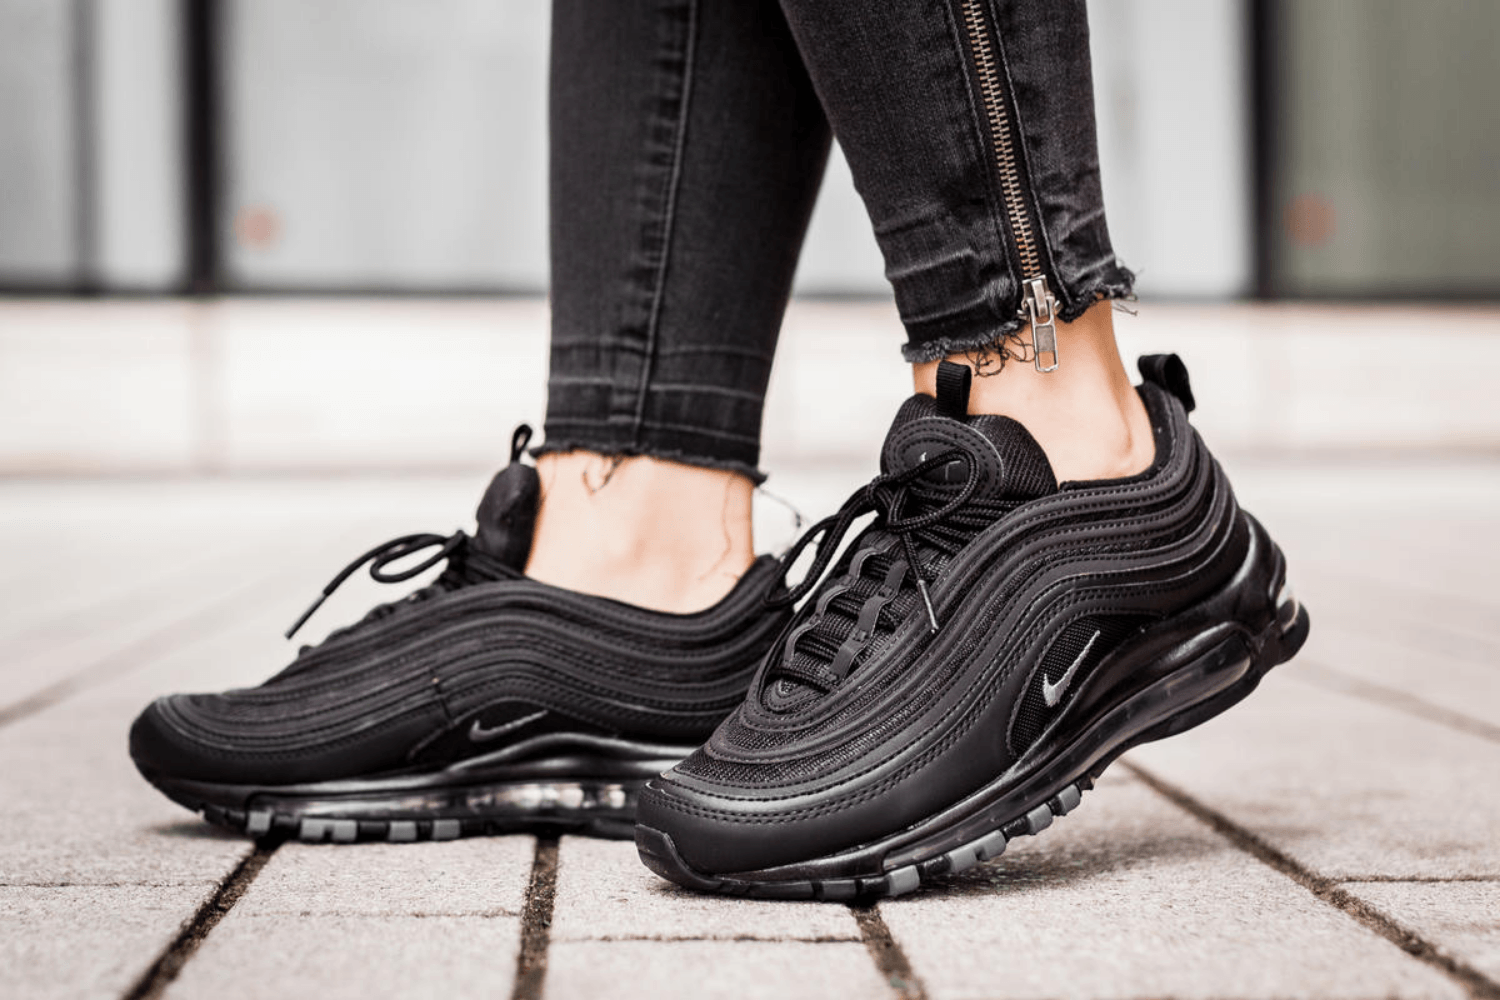 Get 17% off all Nike Air Max 97s at AFEW